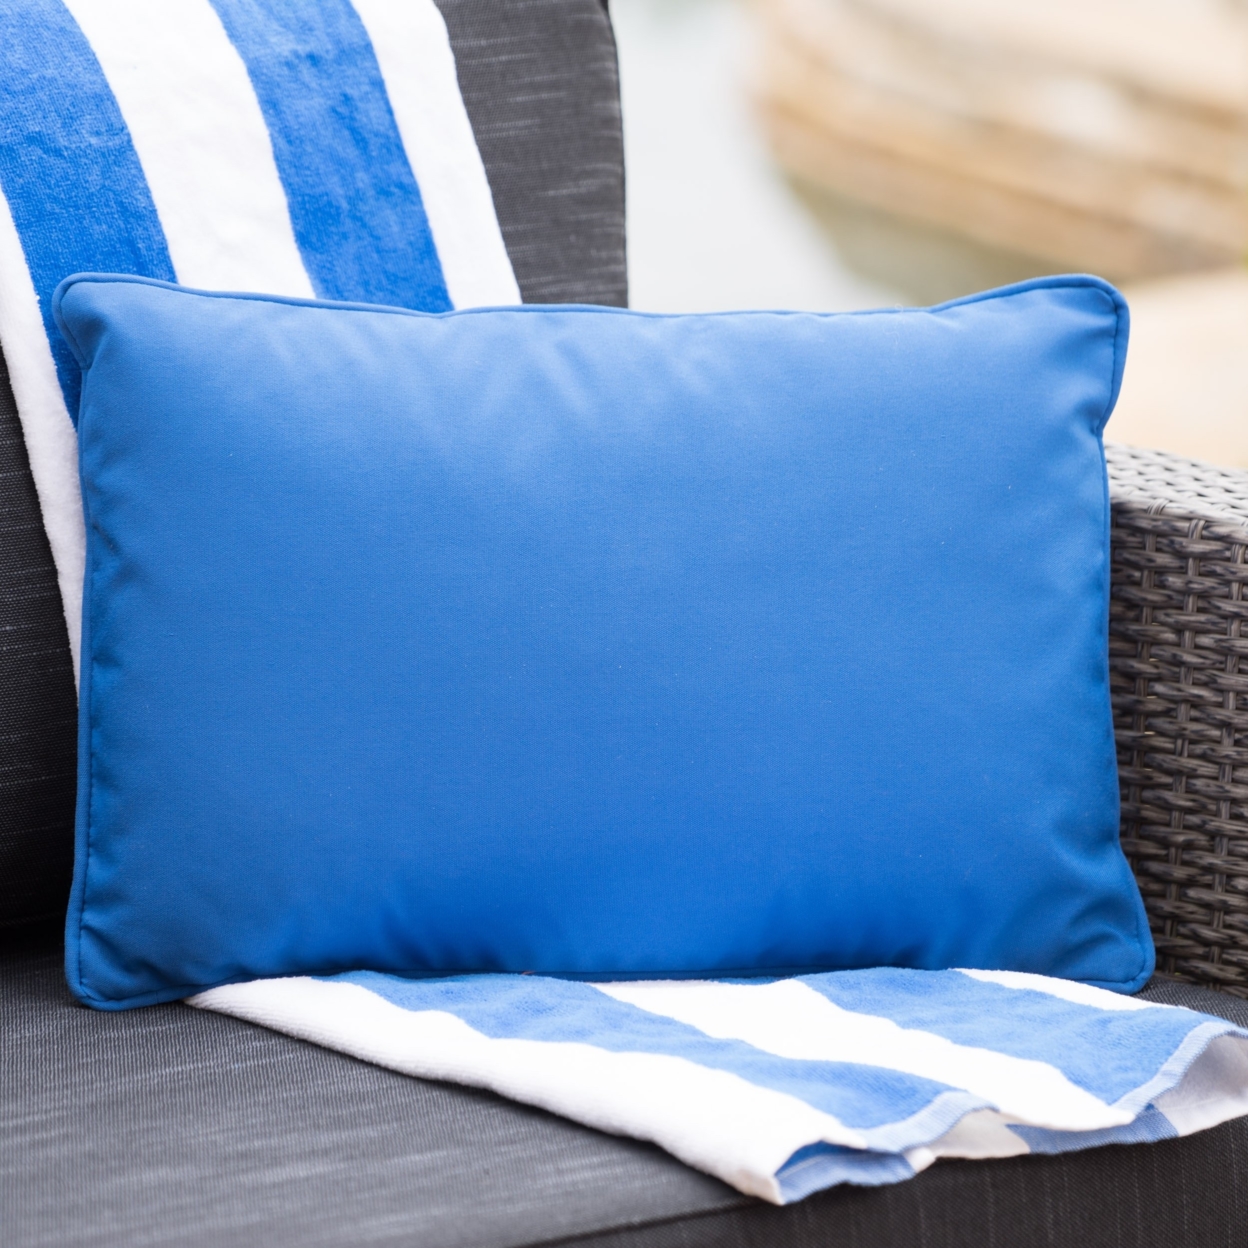 Corona Outdoor Rectangular Water Resistant Pillow(s) - Blue, Qty Of 1